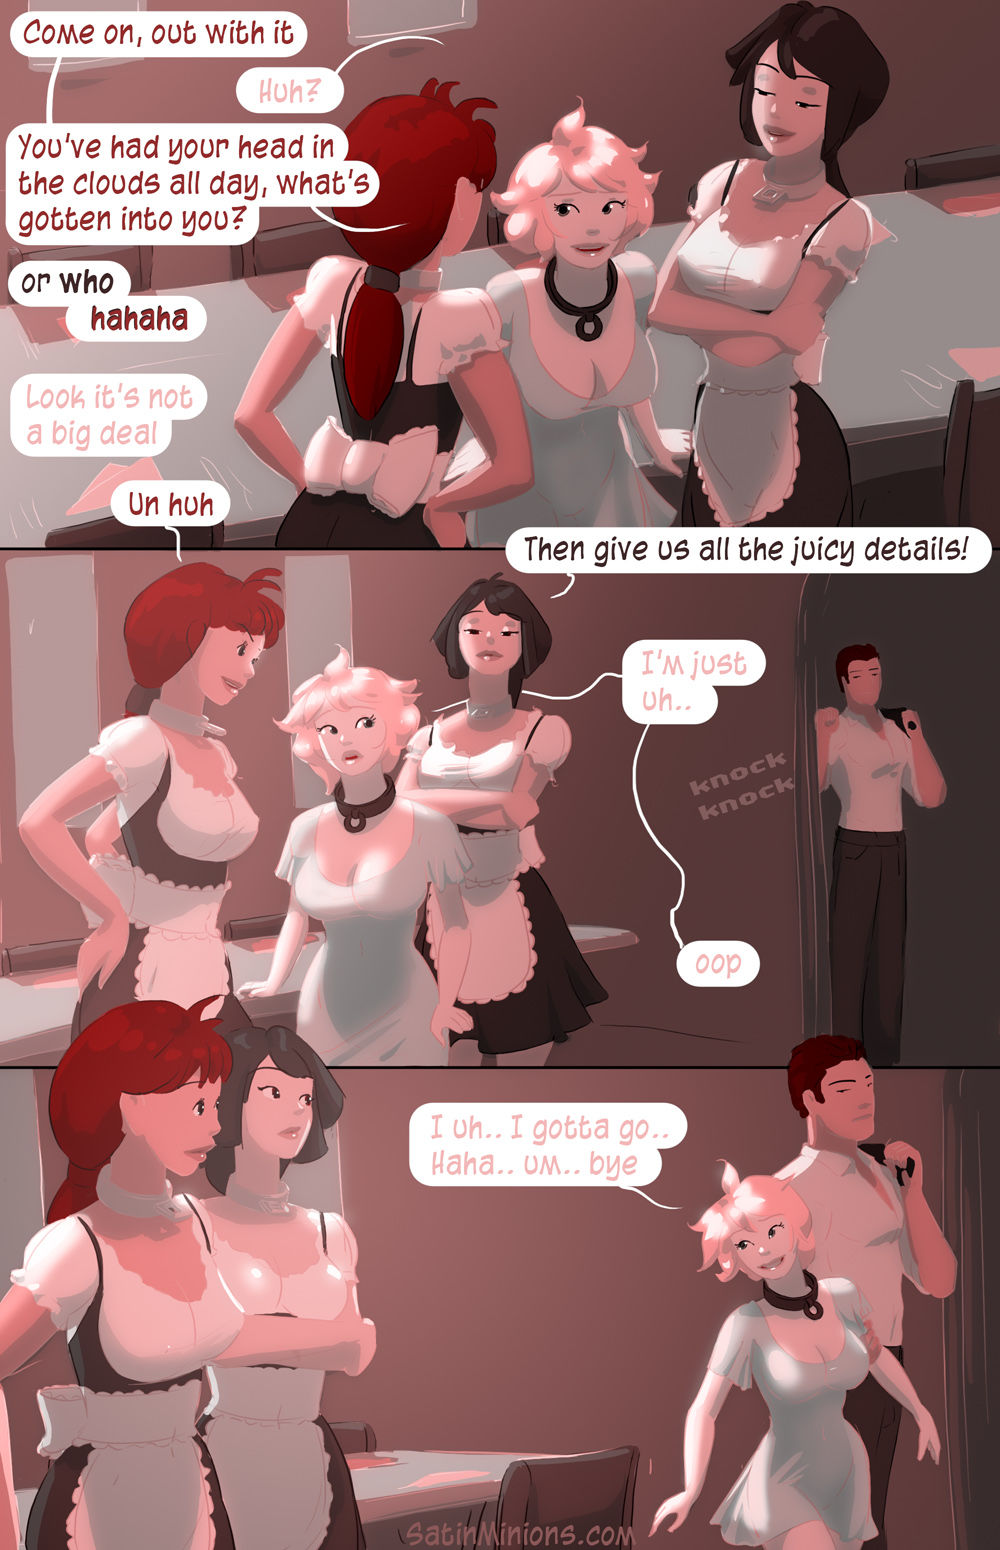 Lighter Chains Vol 6 - Satin Minions page 3